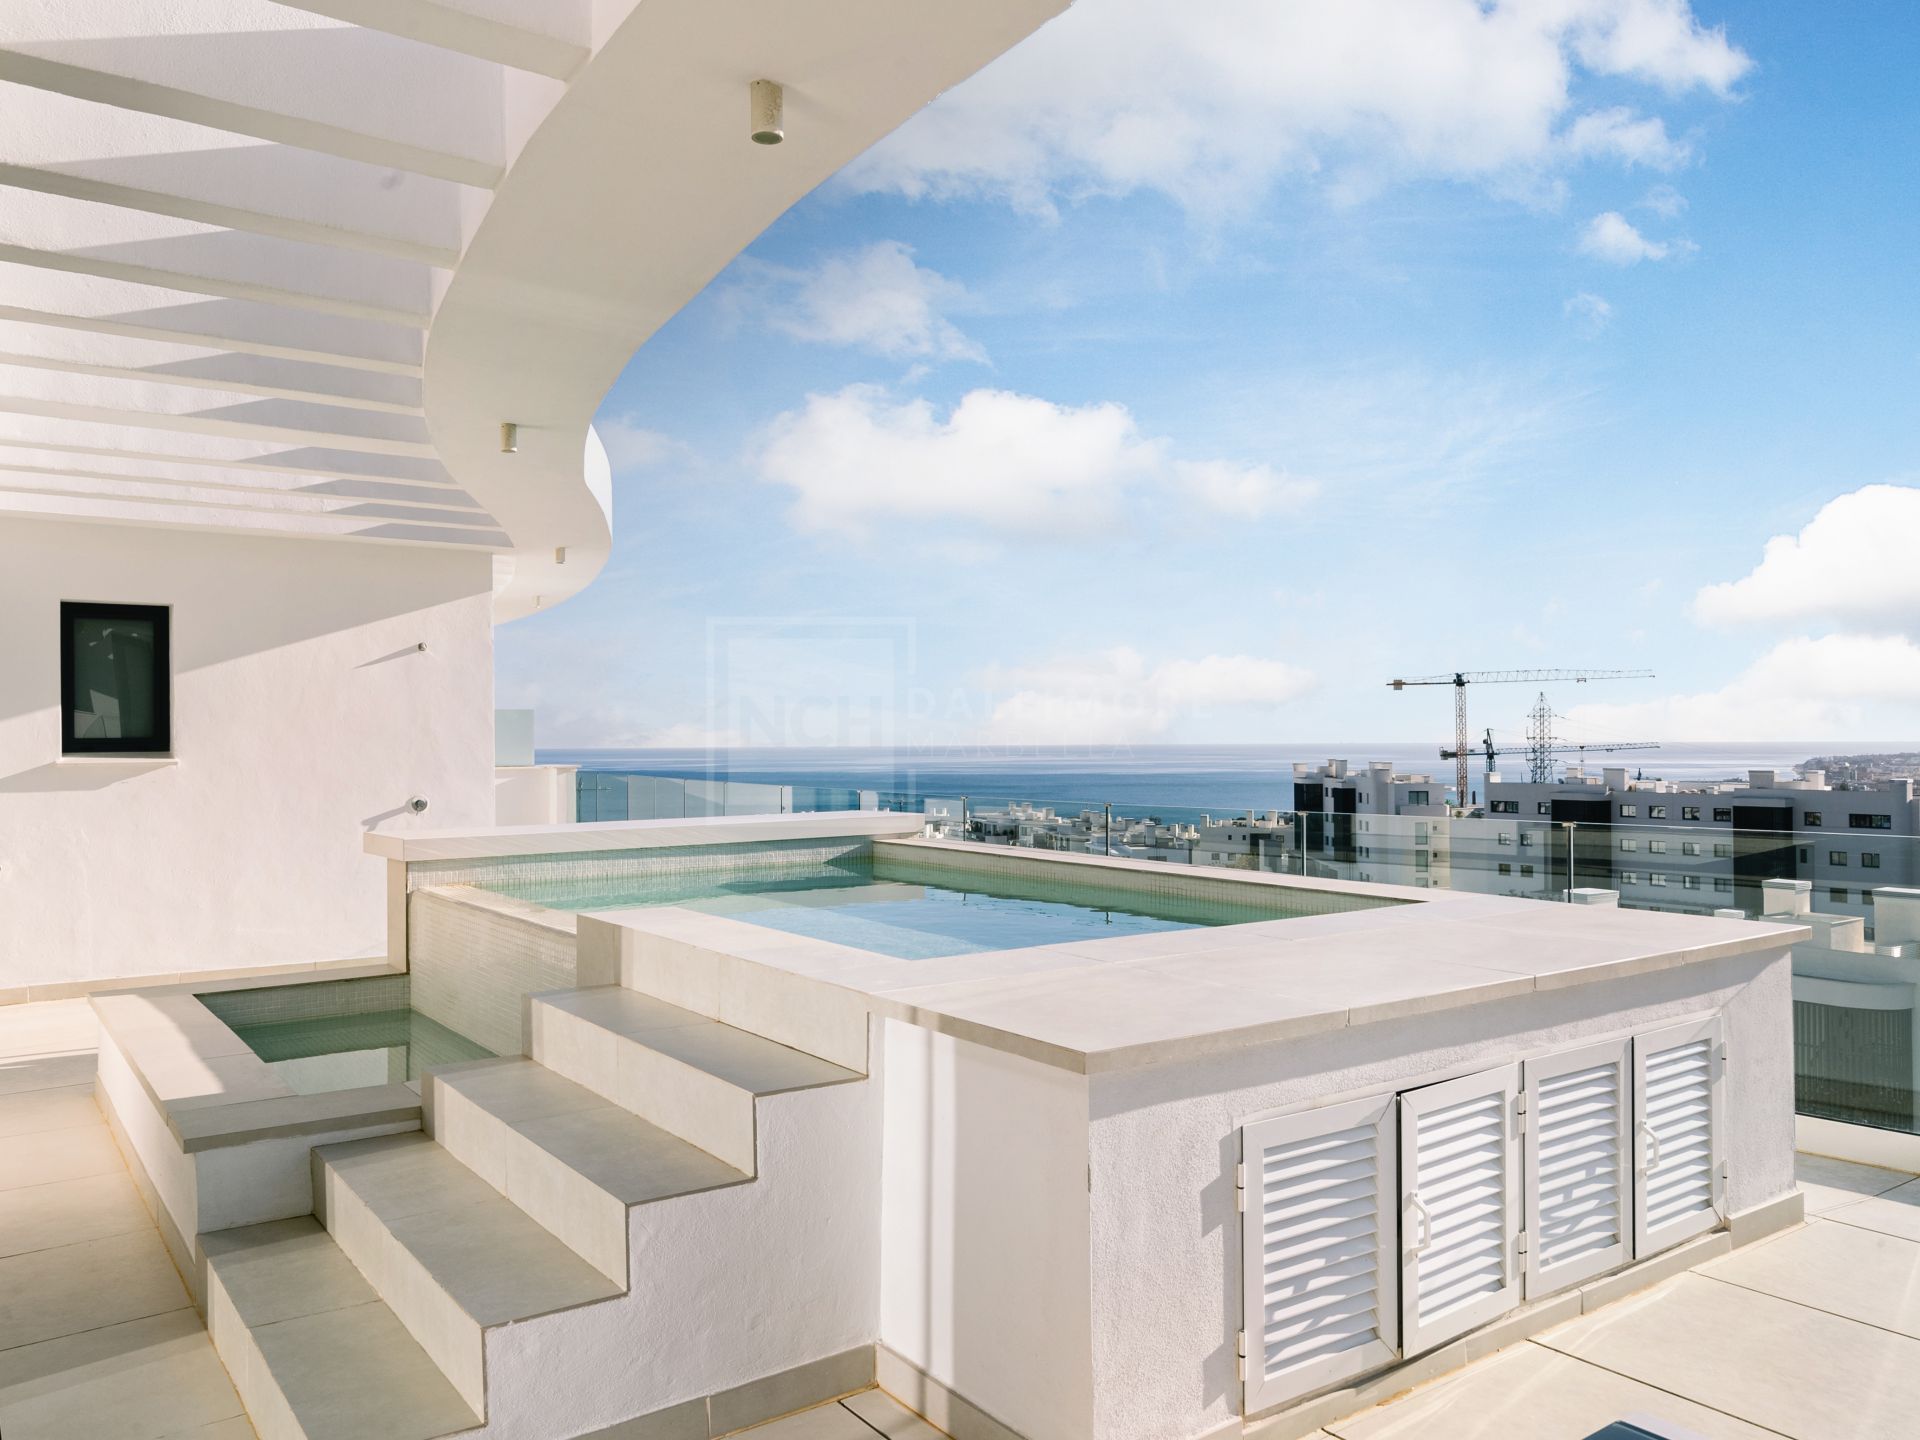 3 BEDROOM LUXURY PENTHOUSE WITH SEA VIEWS & PRIVATE POOL LOCATED IN HIGUERON WEST, FUENGIROLA